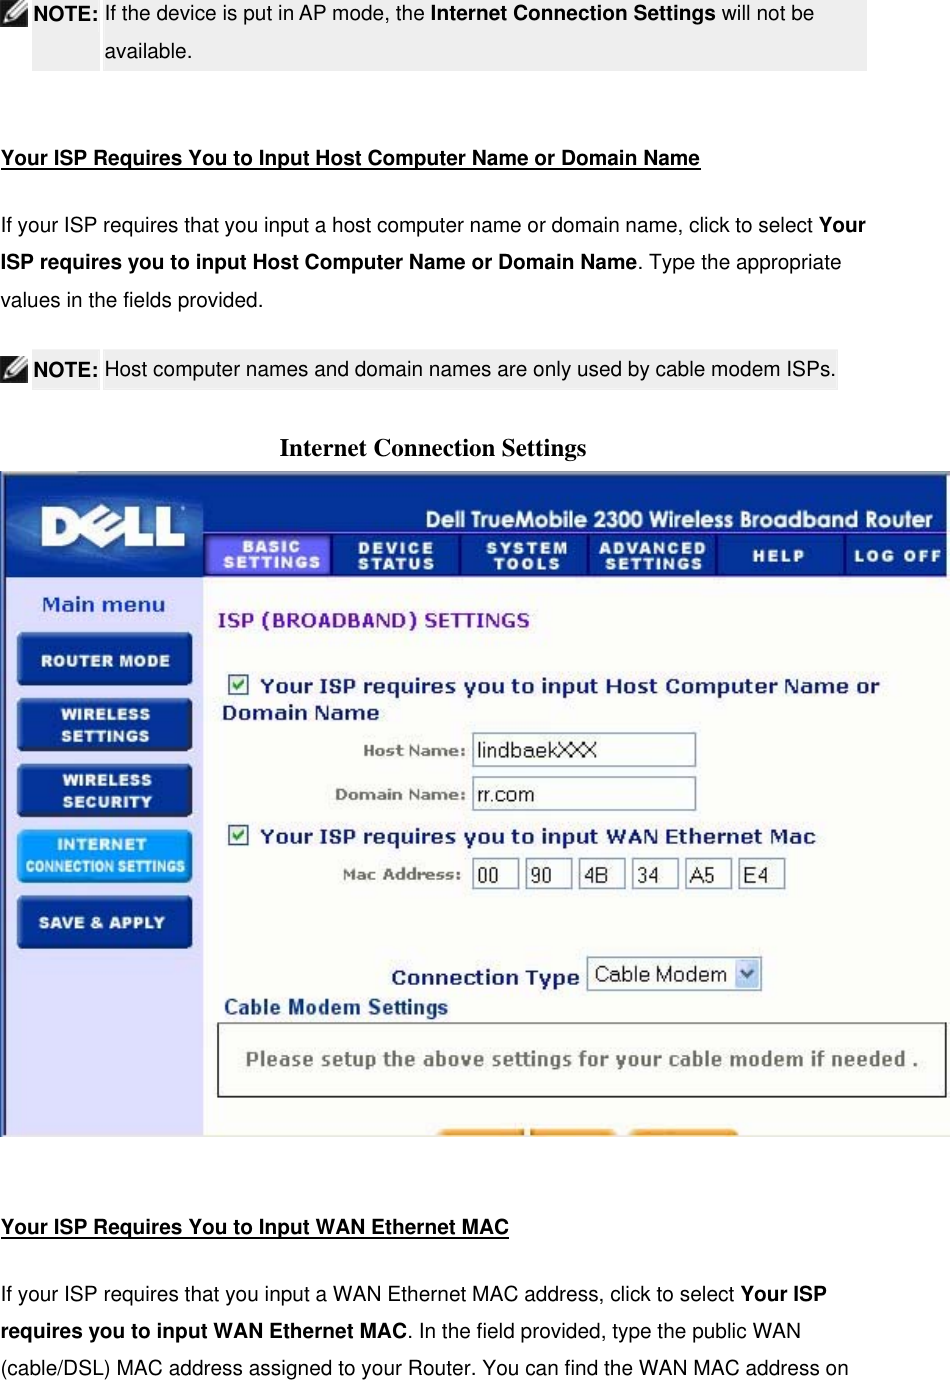   NOTE: If the device is put in AP mode, the Internet Connection Settings will not be available.   Your ISP Requires You to Input Host Computer Name or Domain Name If your ISP requires that you input a host computer name or domain name, click to select Your ISP requires you to input Host Computer Name or Domain Name. Type the appropriate values in the fields provided.  NOTE: Host computer names and domain names are only used by cable modem ISPs.  Internet Connection Settings   Your ISP Requires You to Input WAN Ethernet MAC If your ISP requires that you input a WAN Ethernet MAC address, click to select Your ISP requires you to input WAN Ethernet MAC. In the field provided, type the public WAN (cable/DSL) MAC address assigned to your Router. You can find the WAN MAC address on 